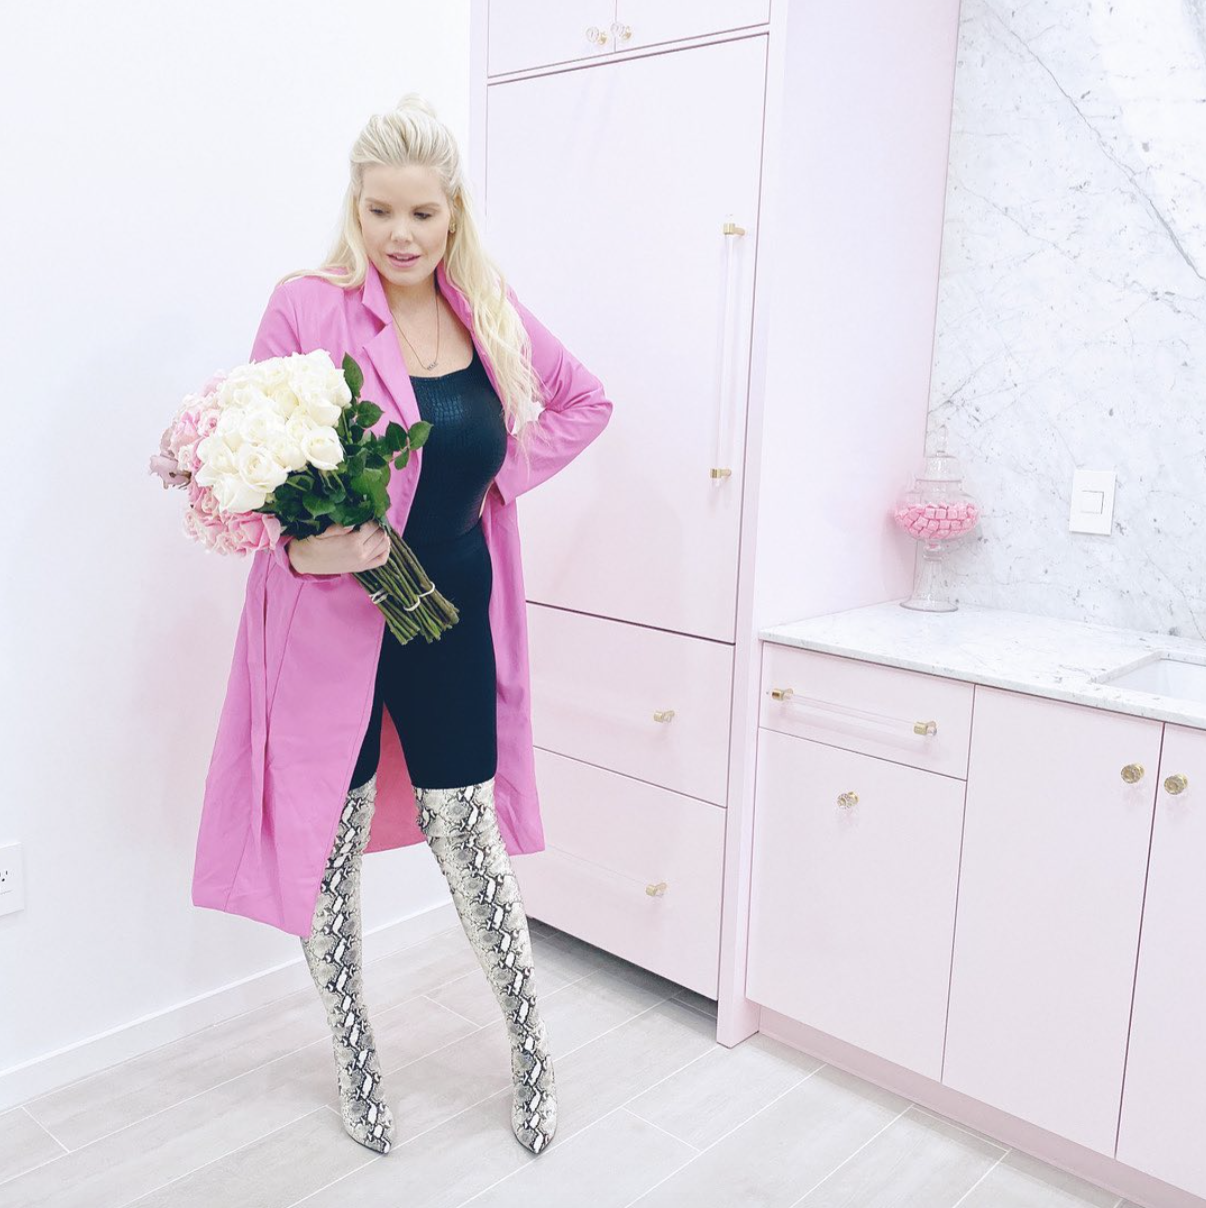 POSH-PR-The-Caroline-Doll-Barbie-Office-Pink-Style-Boss-Goals-At-Home-Workspace-Luxury-Fashion-Infused-Office-The-Doll-HQ-Chic-Agency-Custom-Dream-Kitchen-9.png